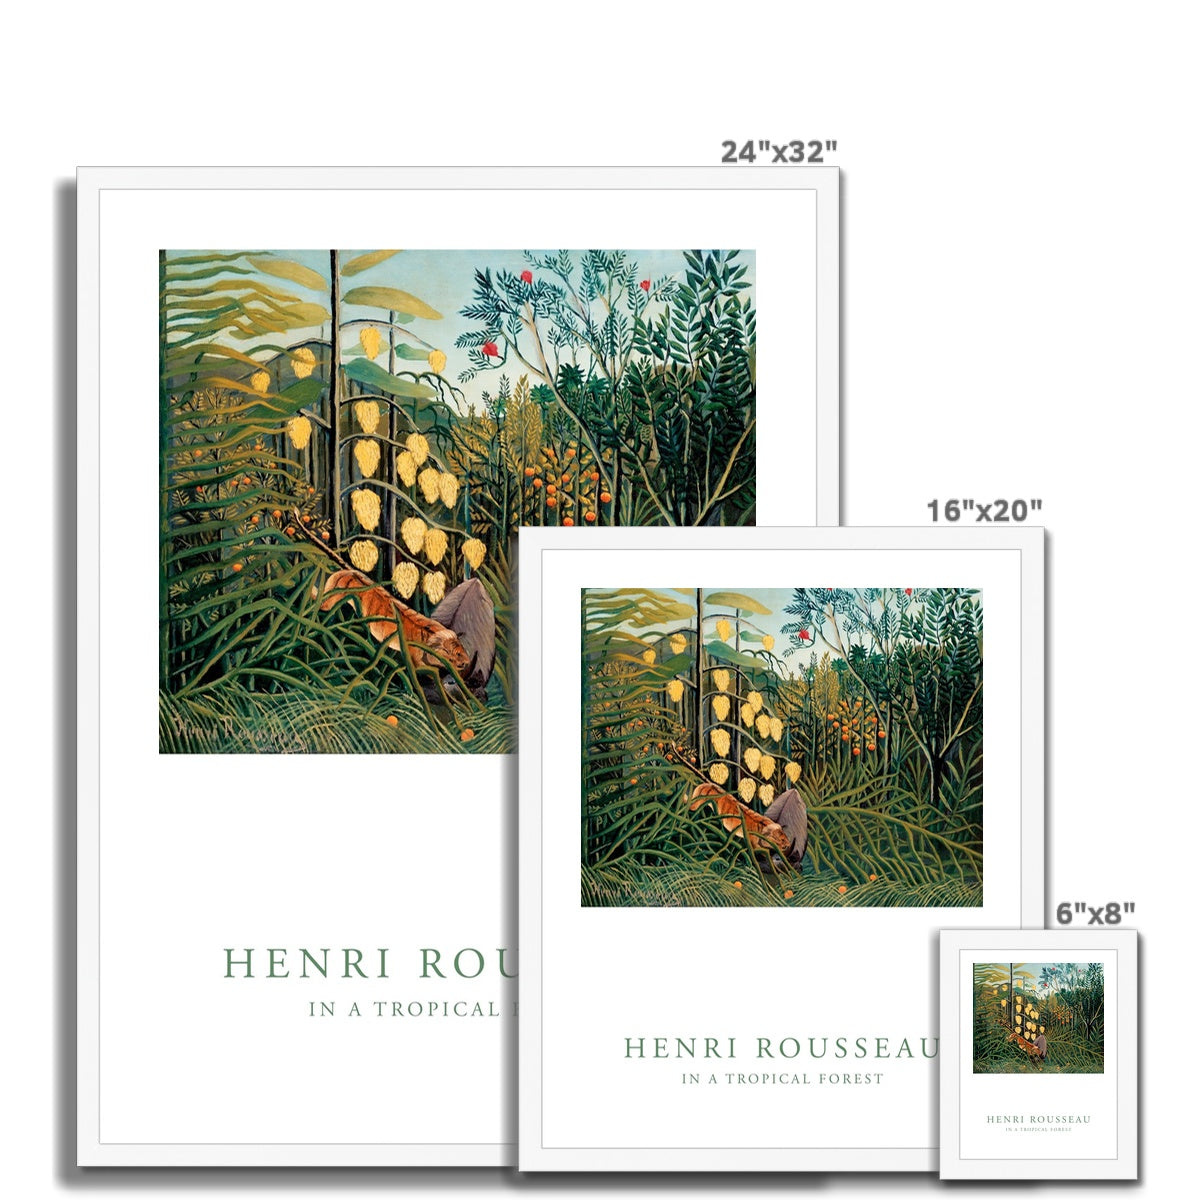 Rousseau -  In a Tropical Forest gerahmtes Poster - Atopurinto